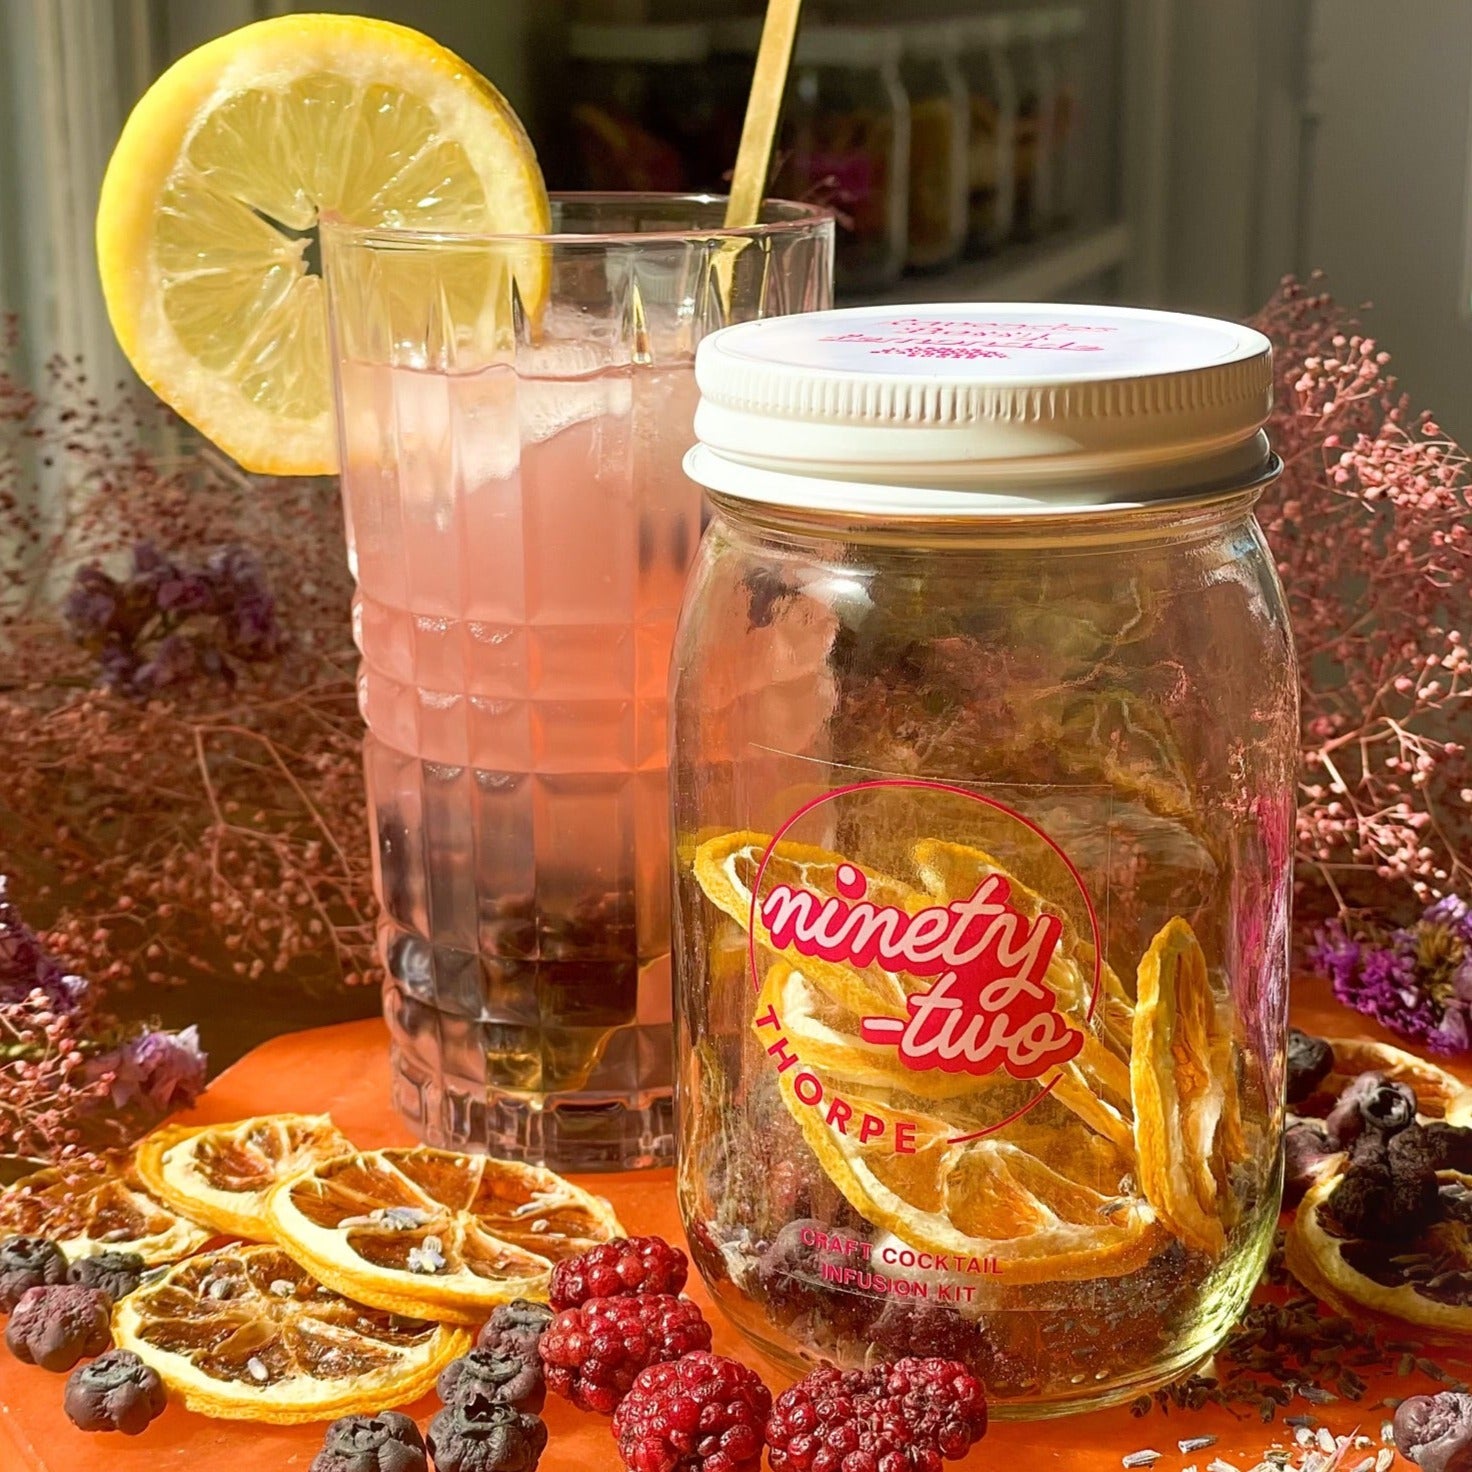 Shop - Craft Cocktail Infusions